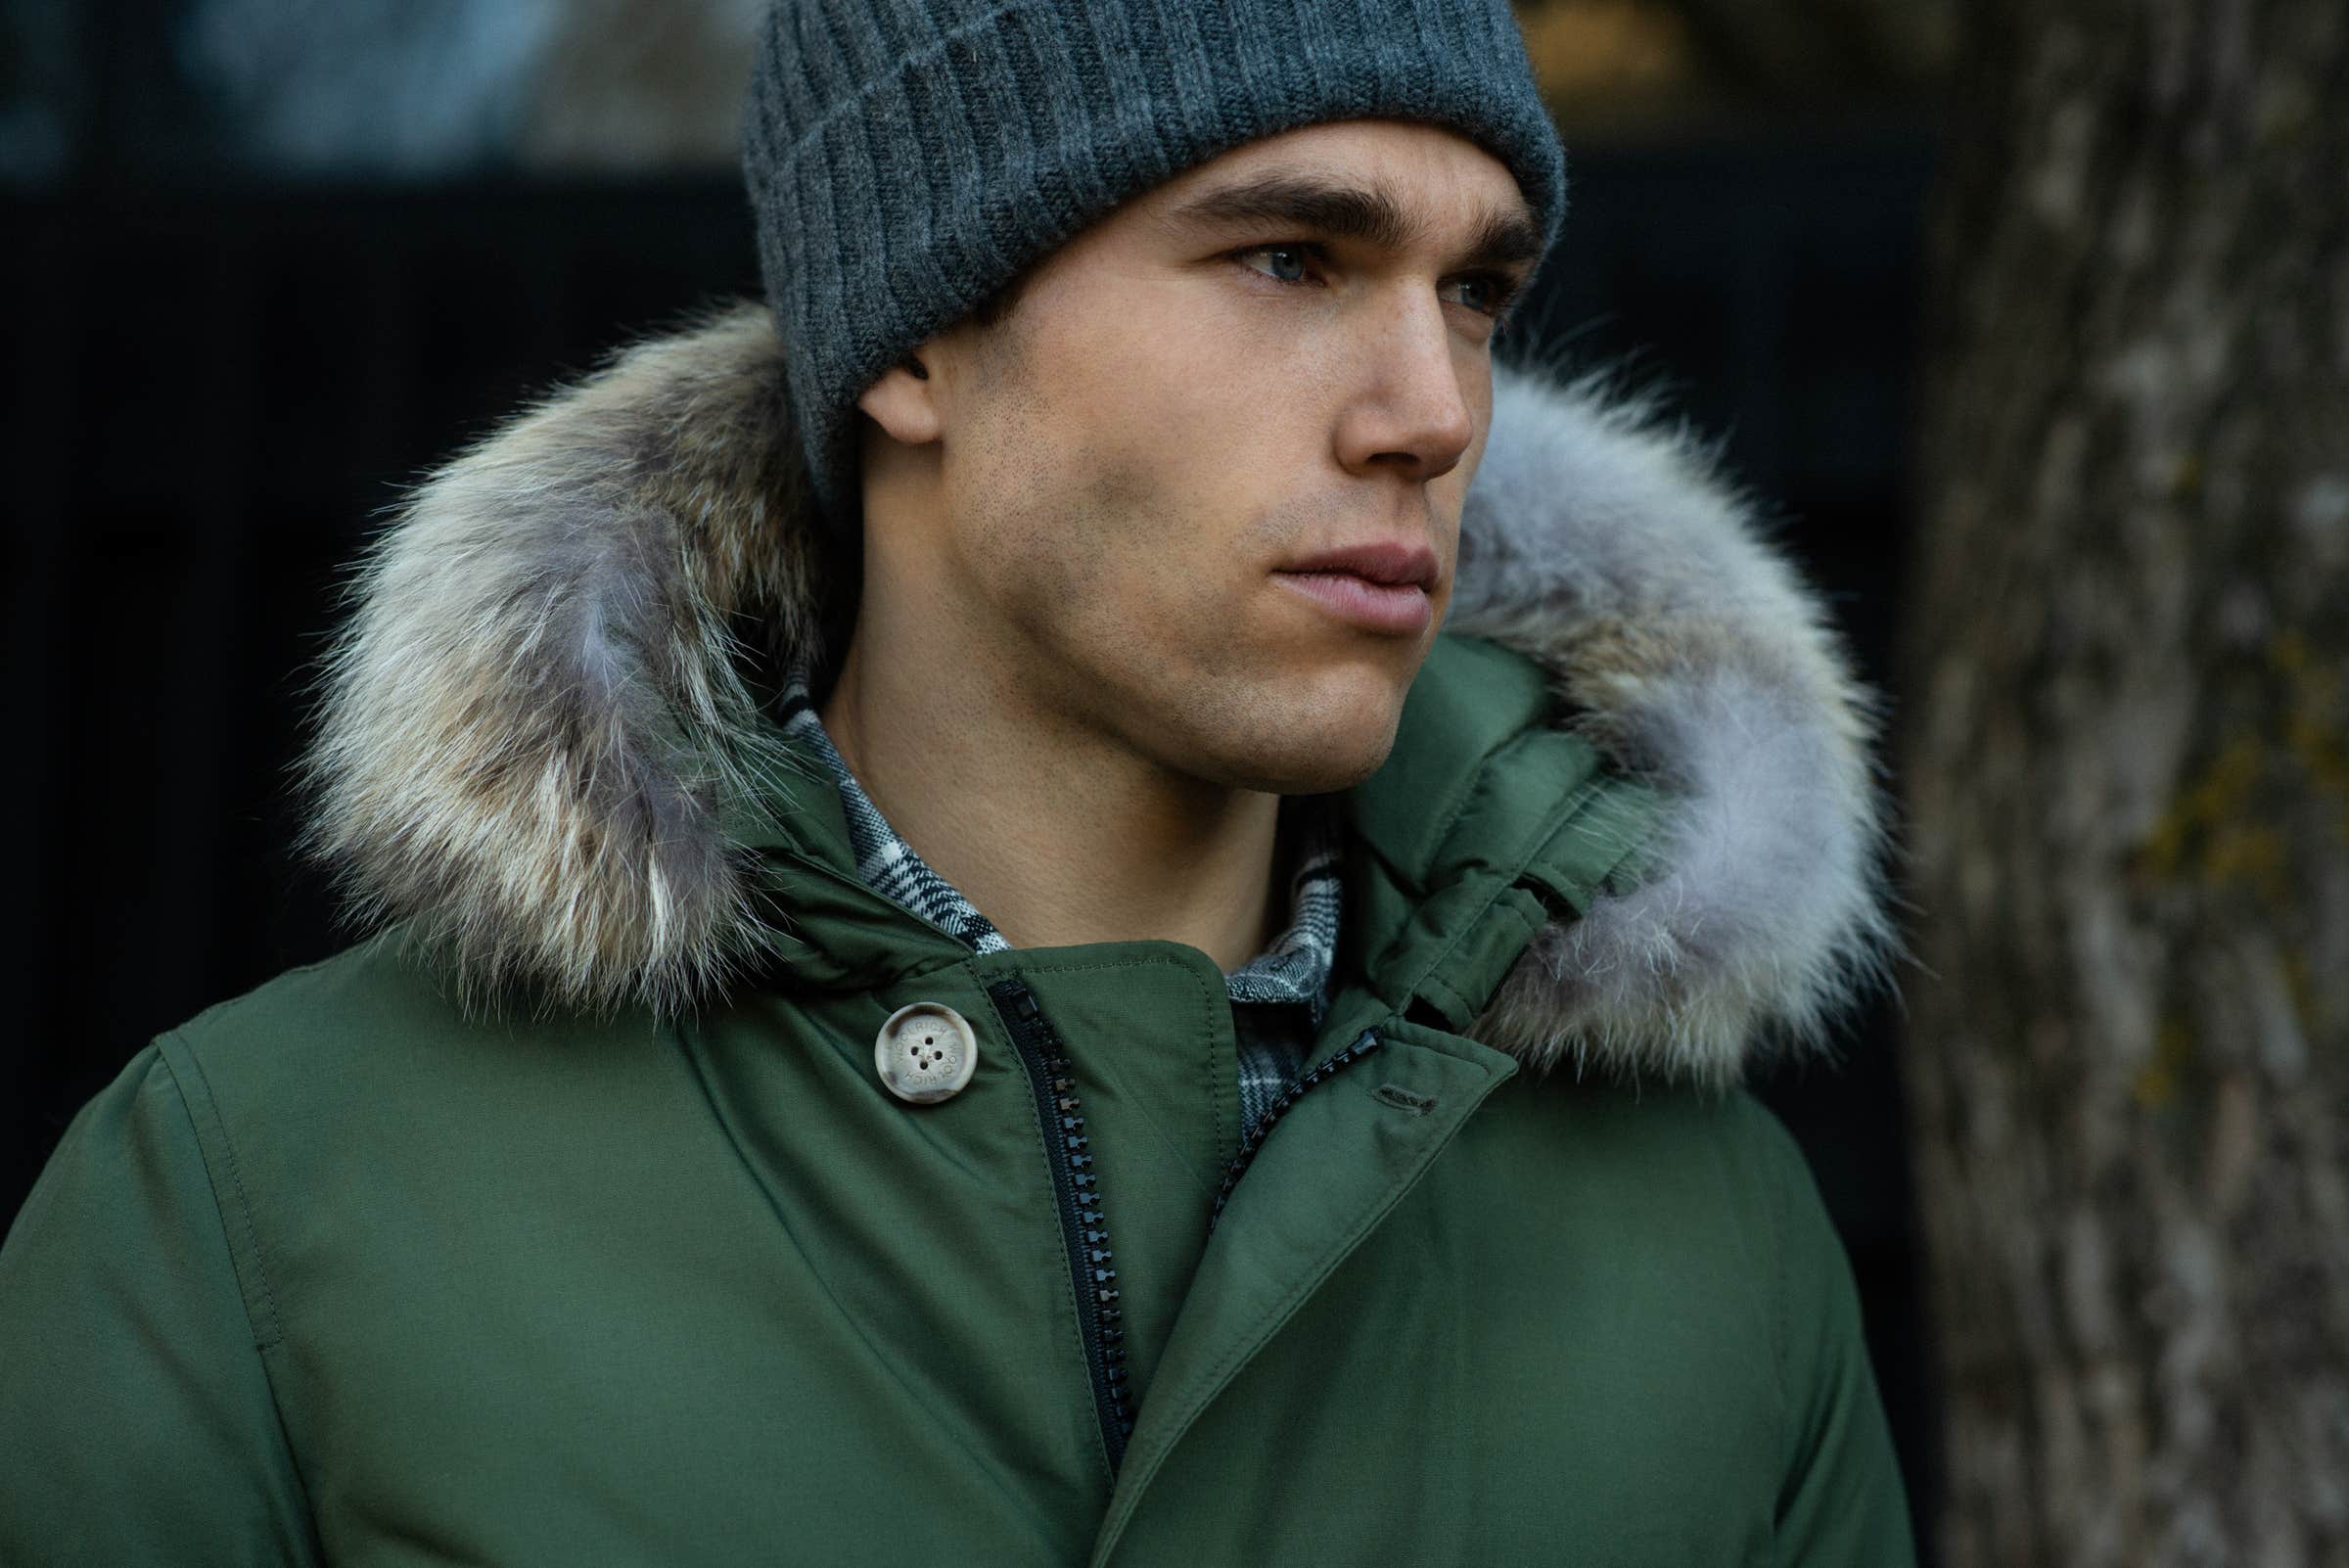 Outerwear Essentials: 4 Must-Have Cold Weather Looks